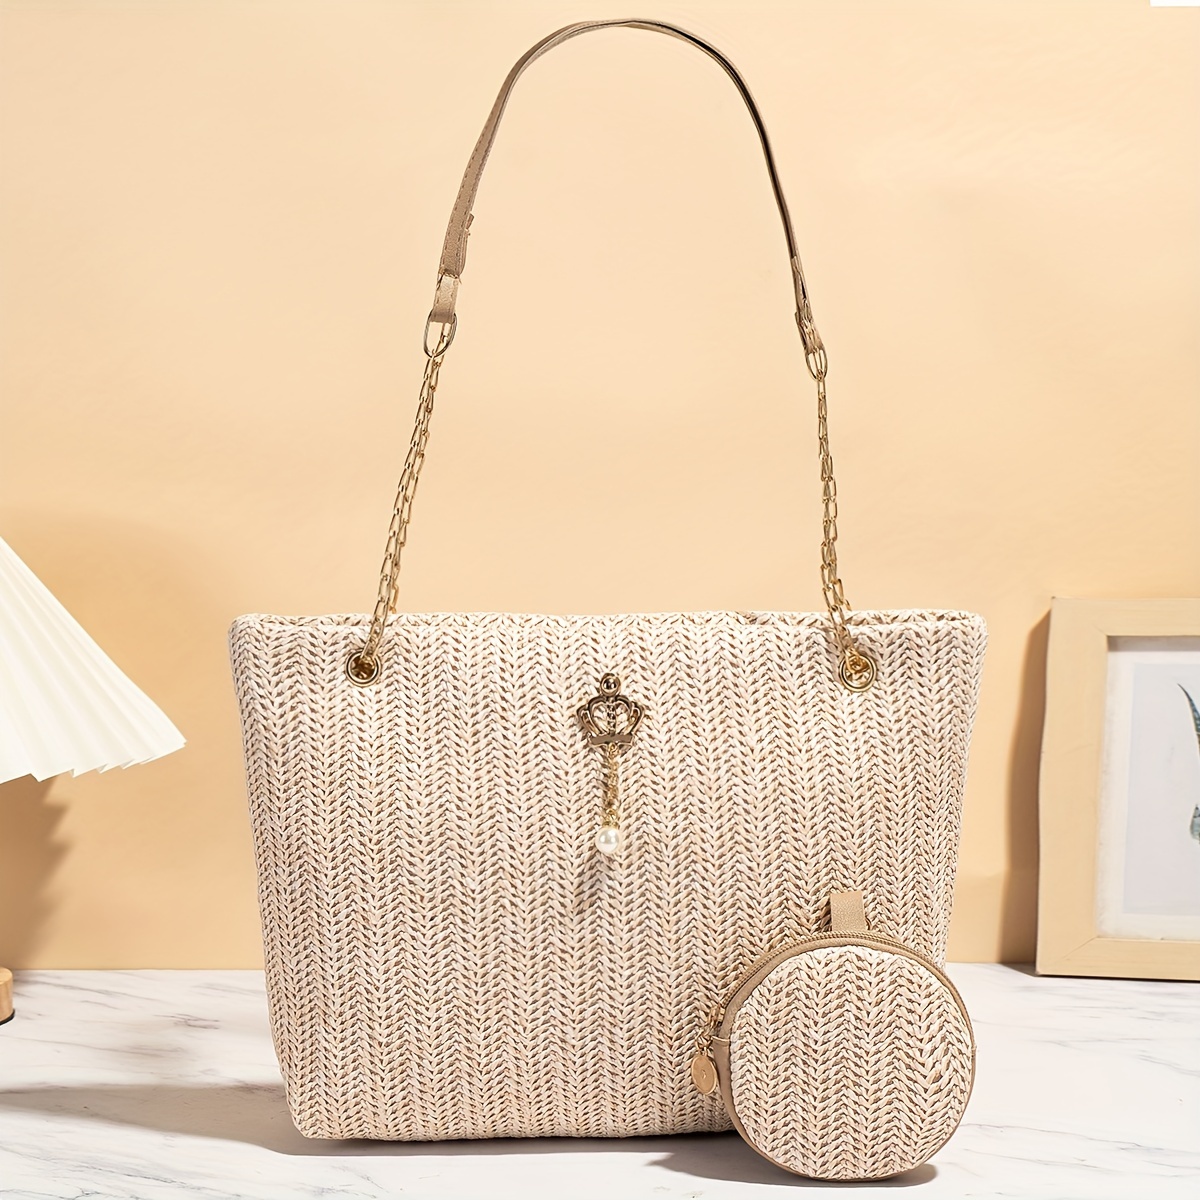 

Women's Woven Straw Tote Bag Set With Matching Coin Purse, Fashionable Shoulder Handbag For Shopping, Travel, Beach, Vacation, Festive Occasions